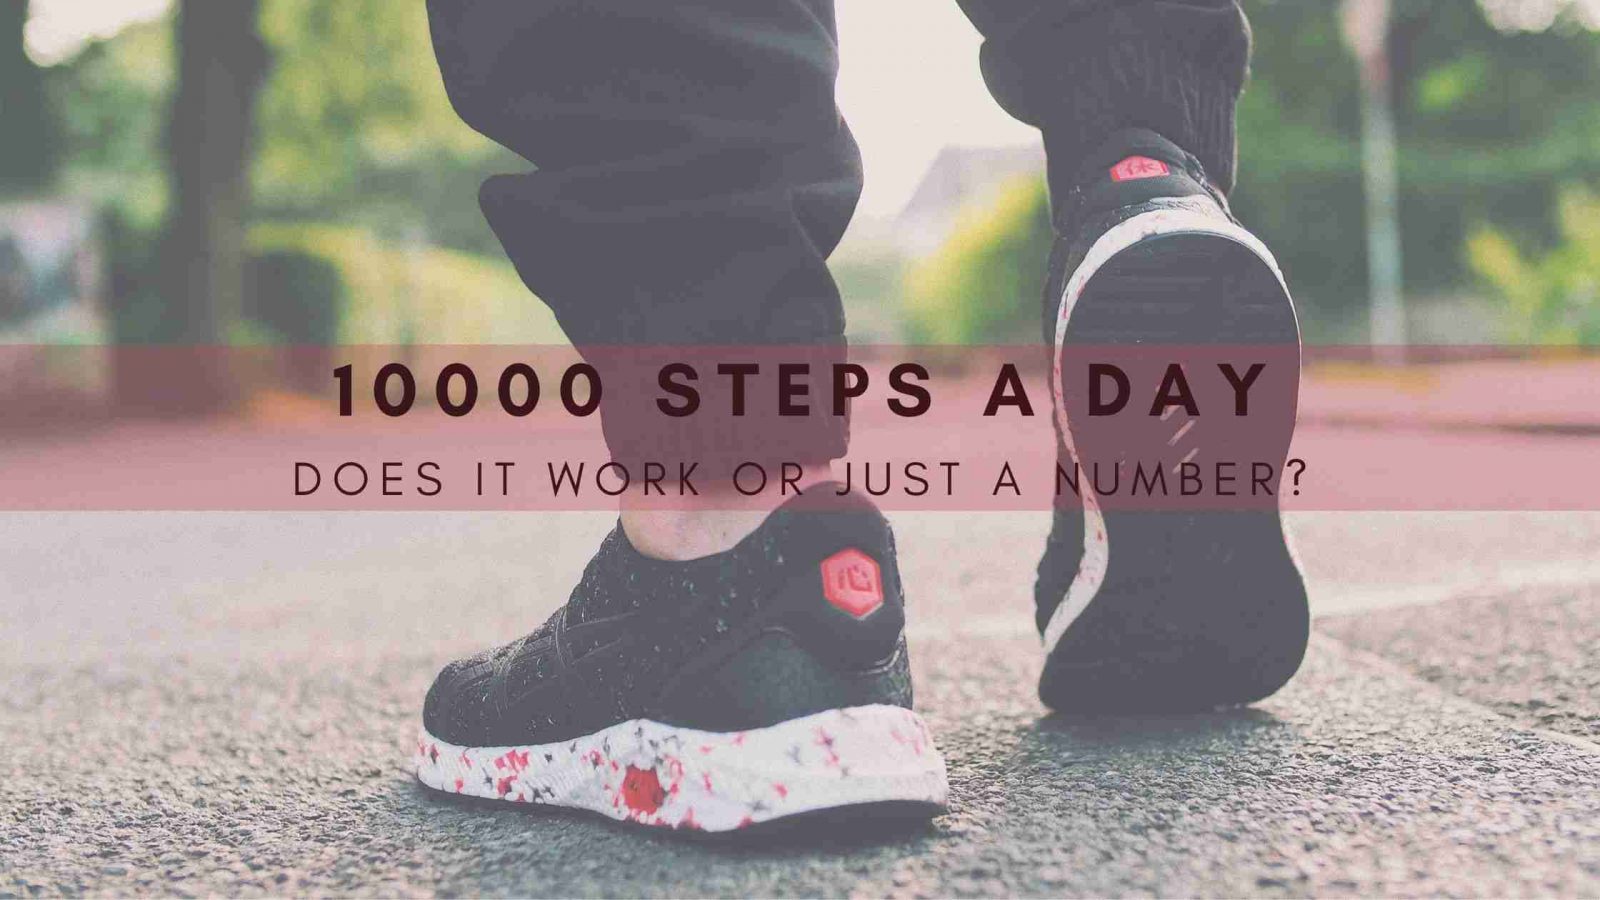 10000 STEPS A DAY